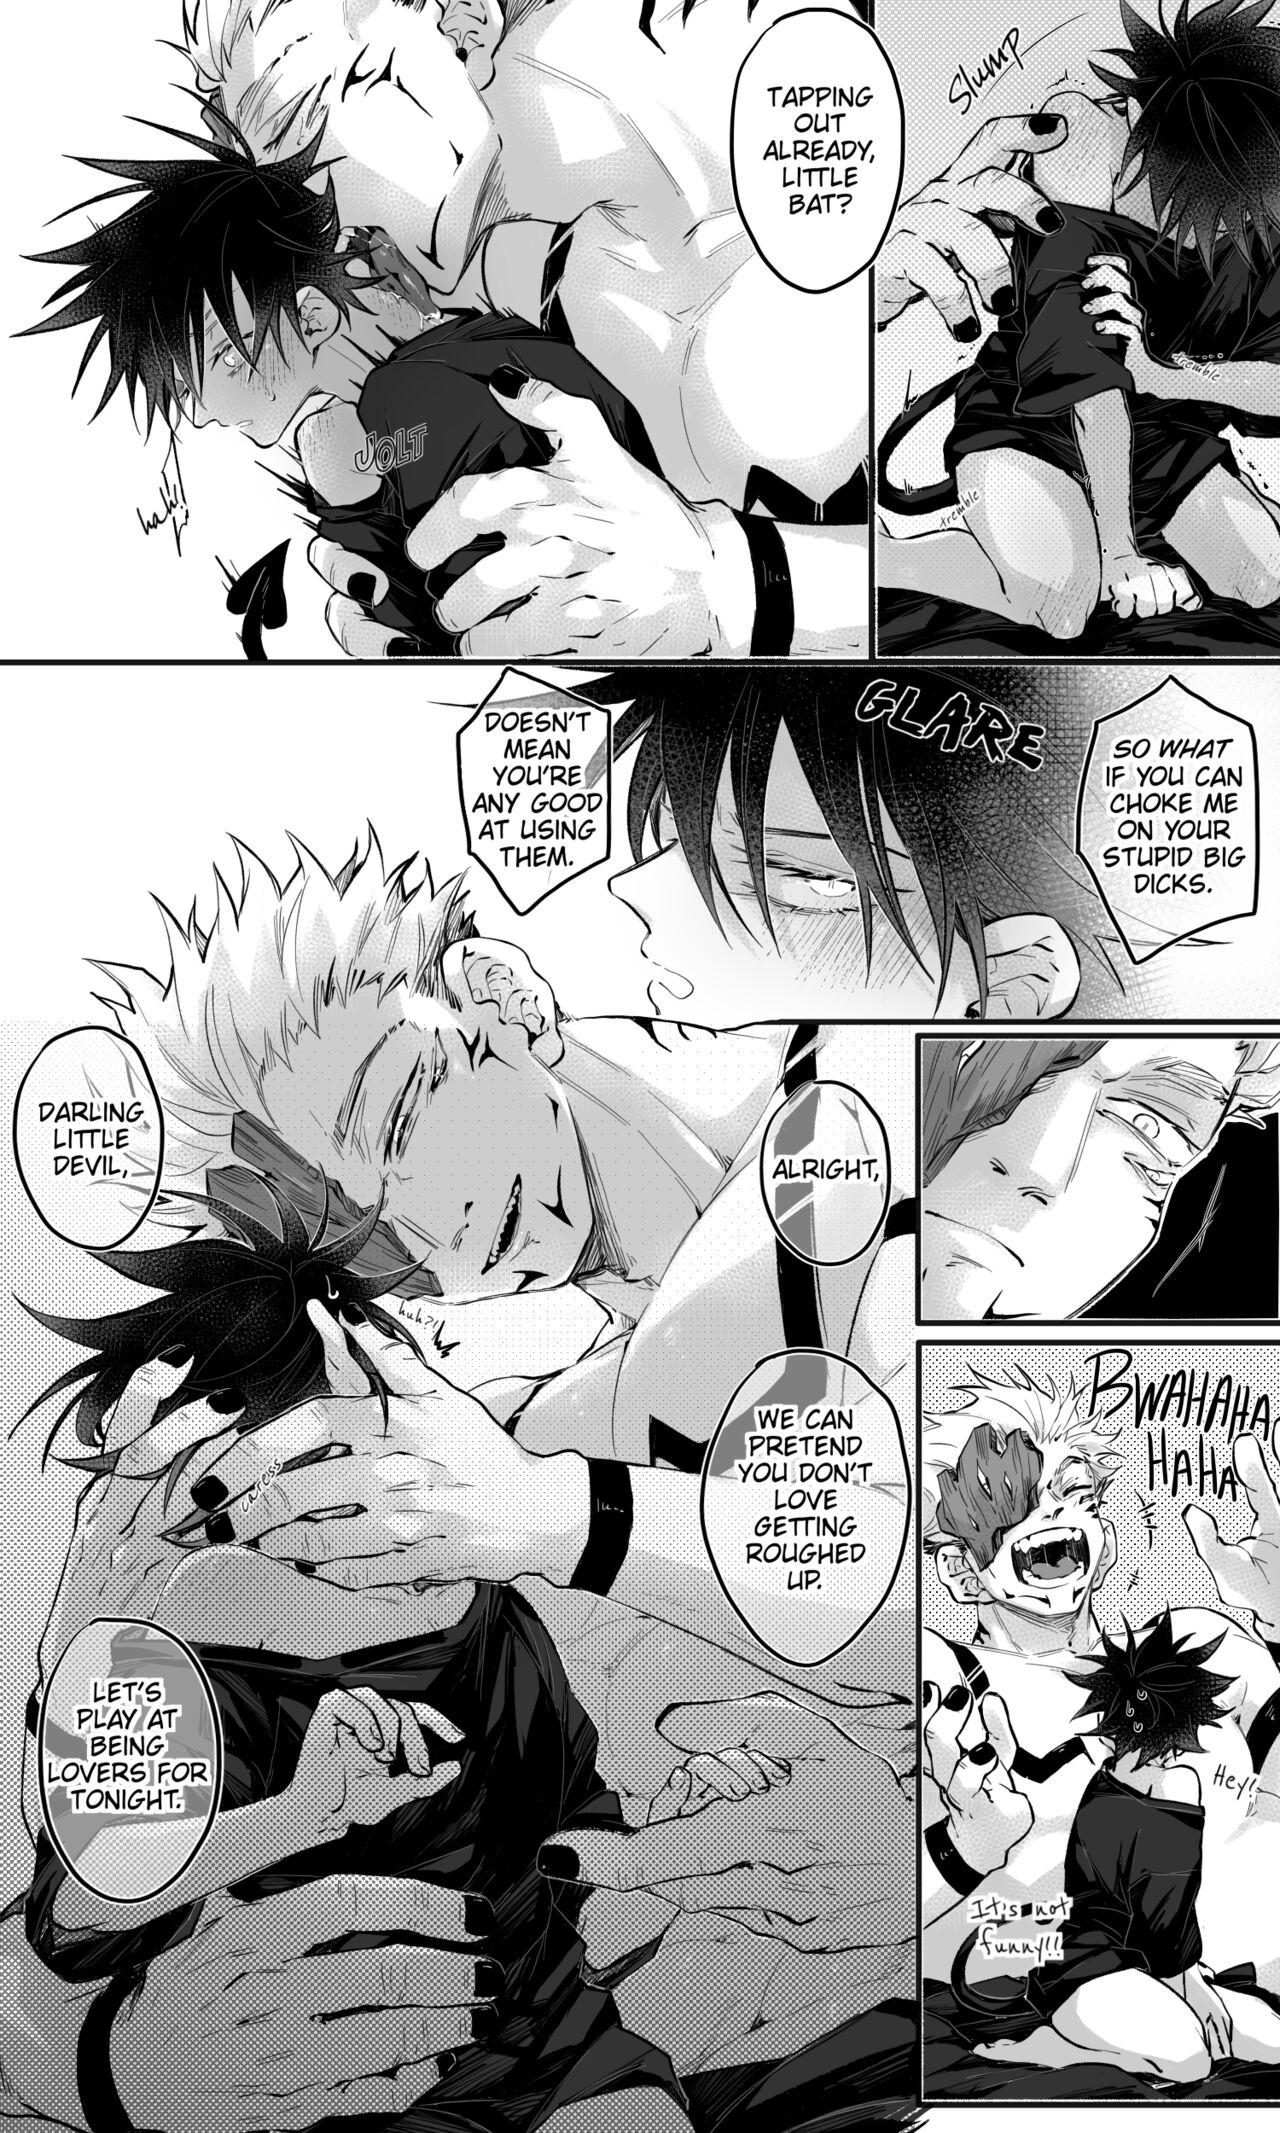 Ex Girlfriend OGKuna x Succubus! Megumi for Strad in the skfsit SS event - Jujutsu kaisen Amiga - Page 6